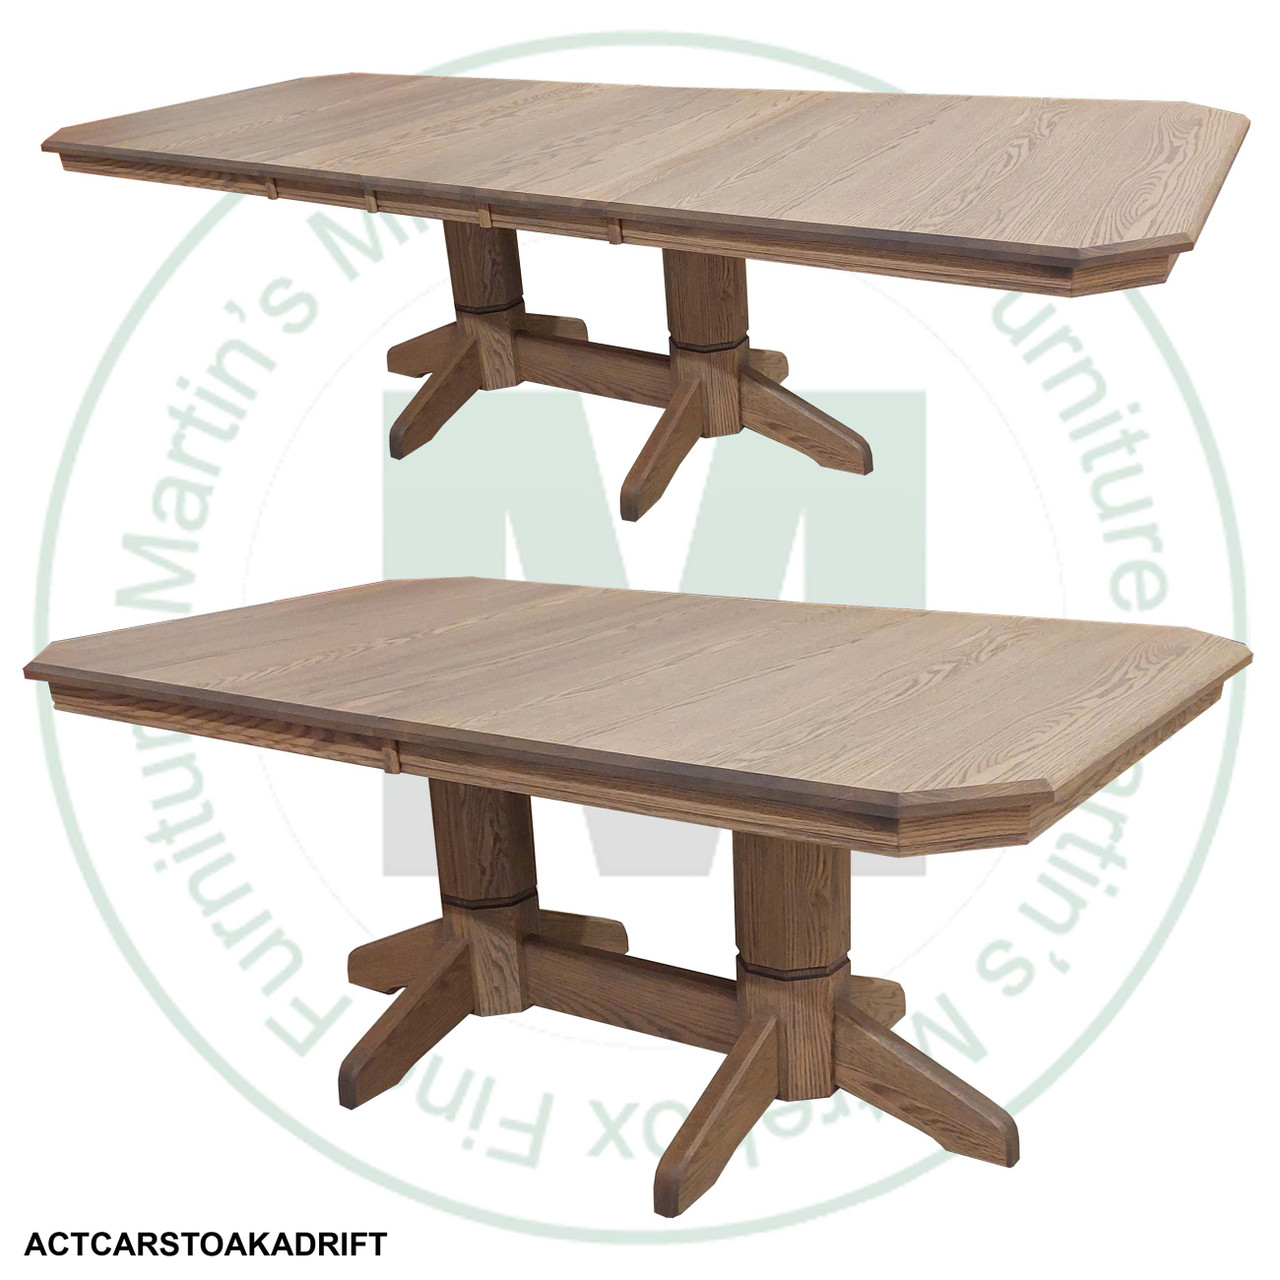 Maple Urban Classic Double Pedestal Table 48''D x 72''W x 30''H With 4 - 12'' Leaves